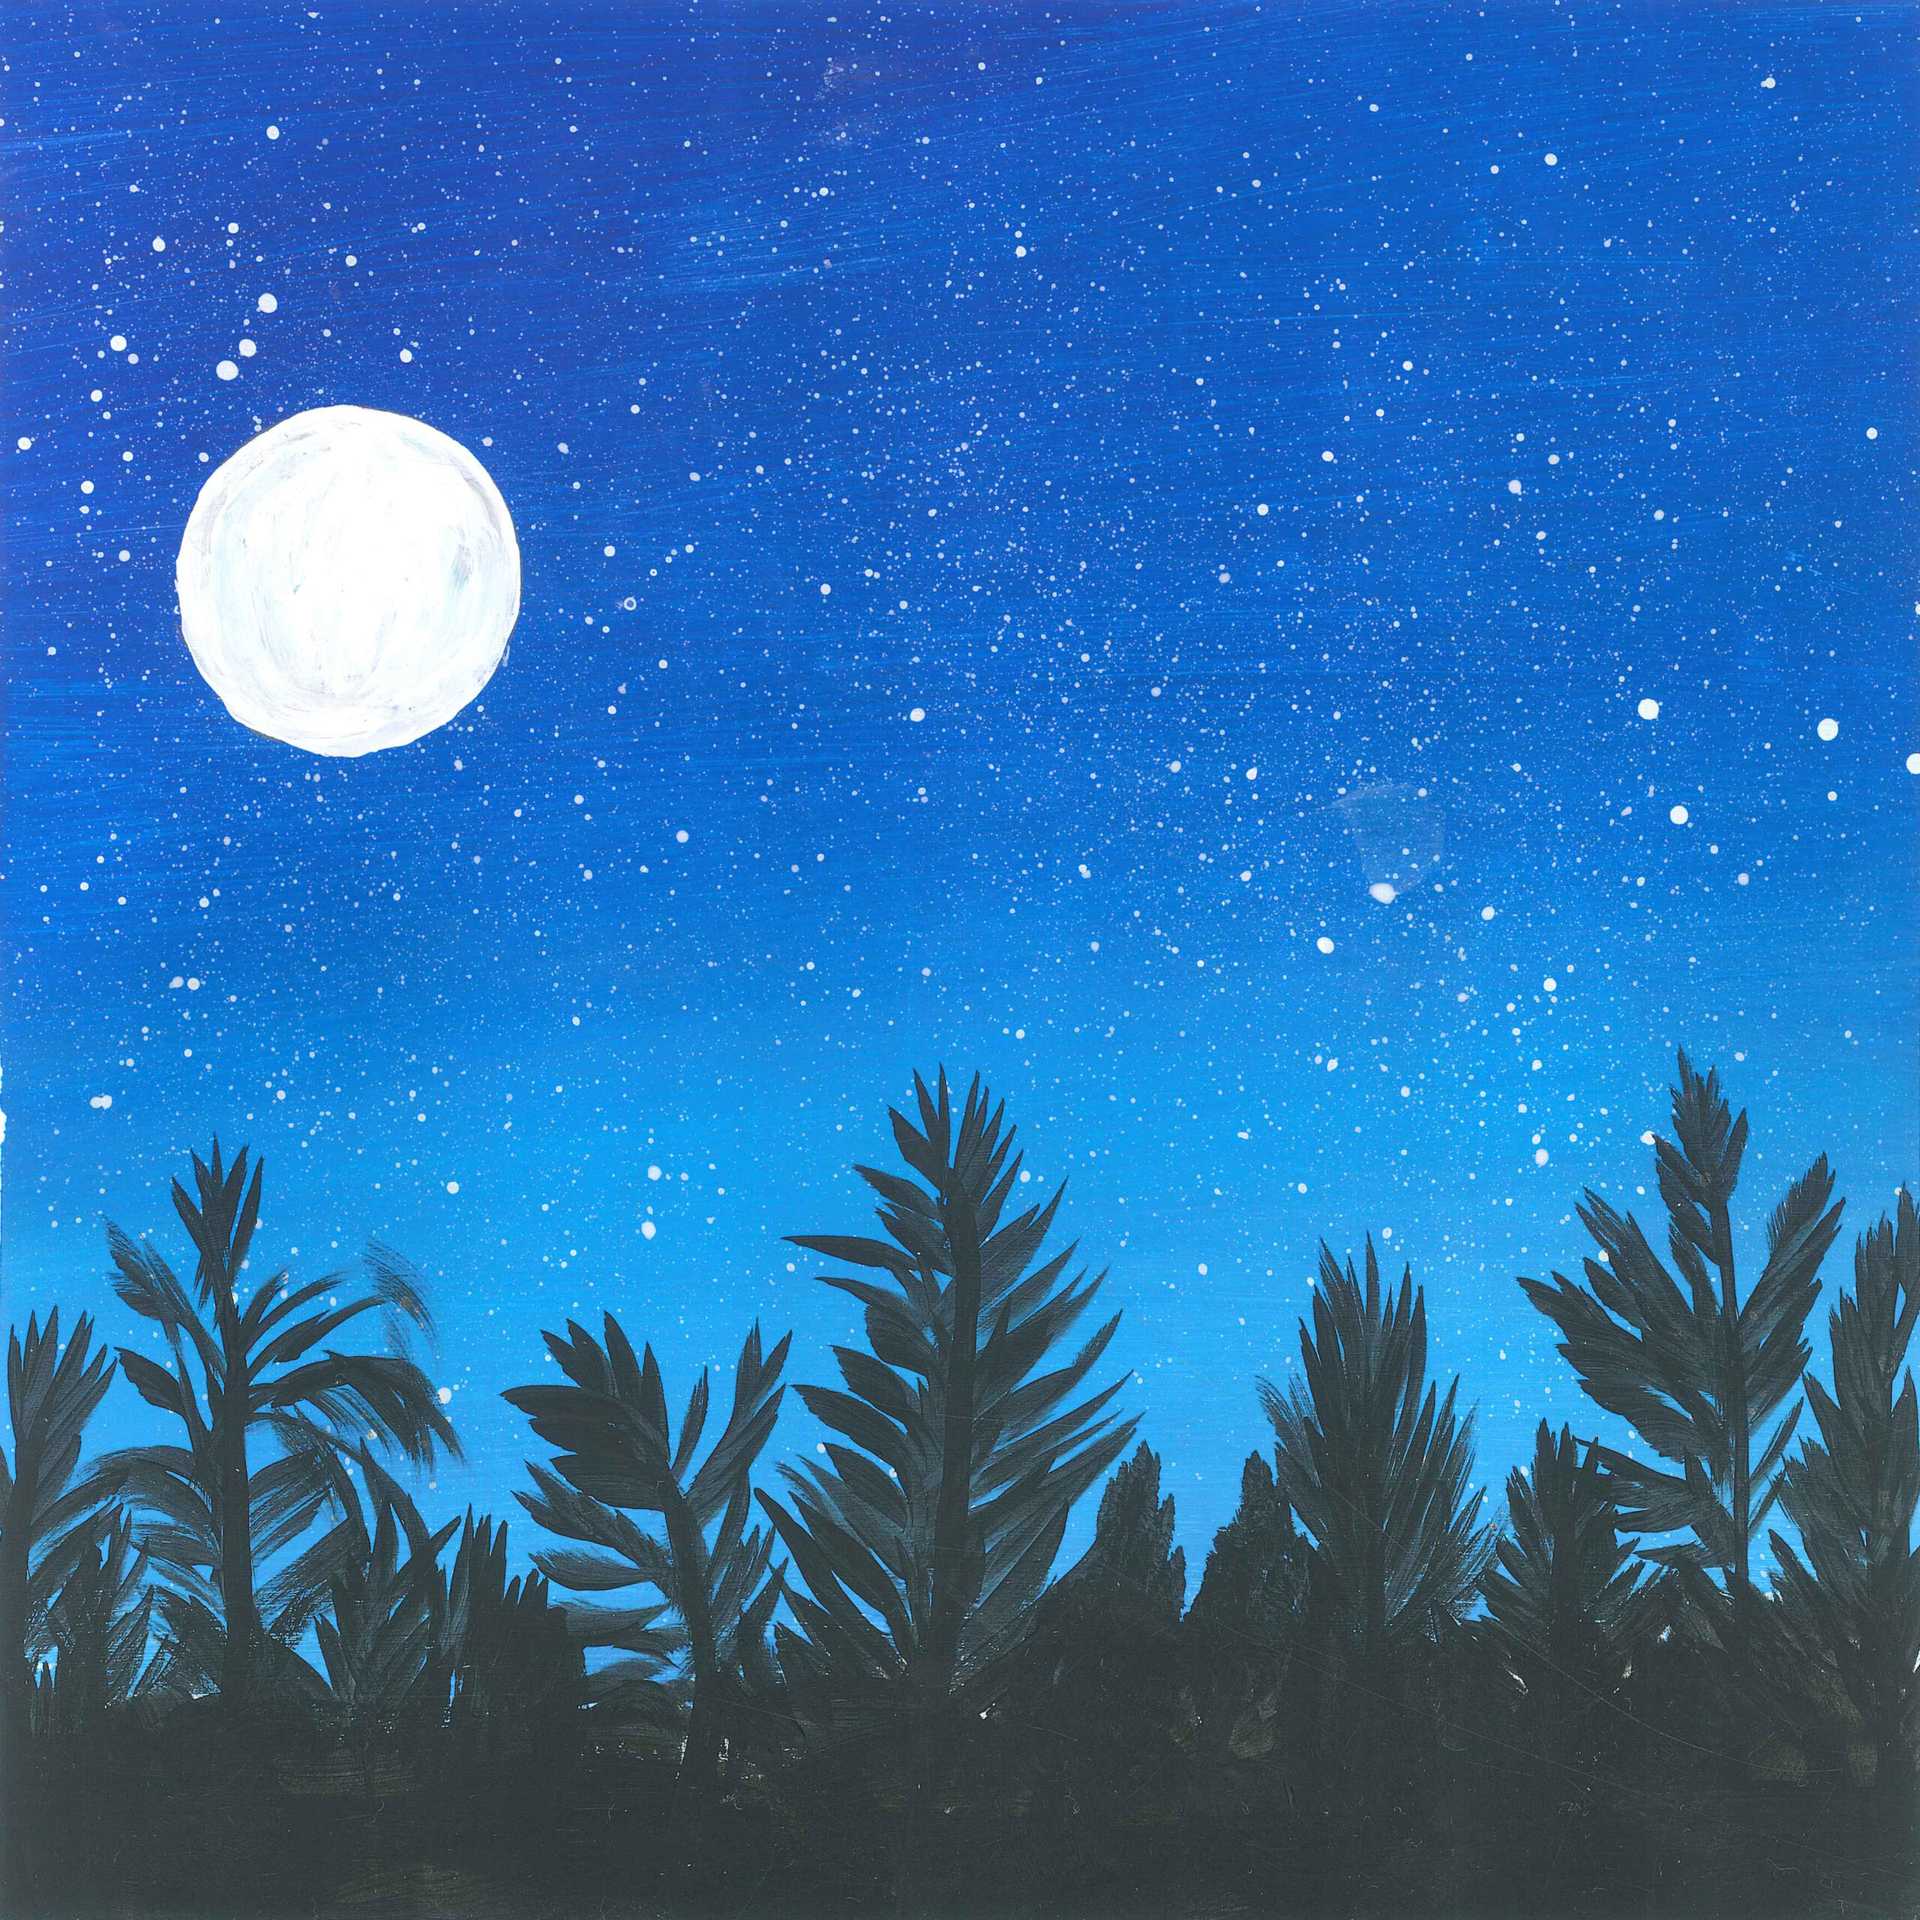 A Lerot in the Night - nature landscape painting - earth.fm